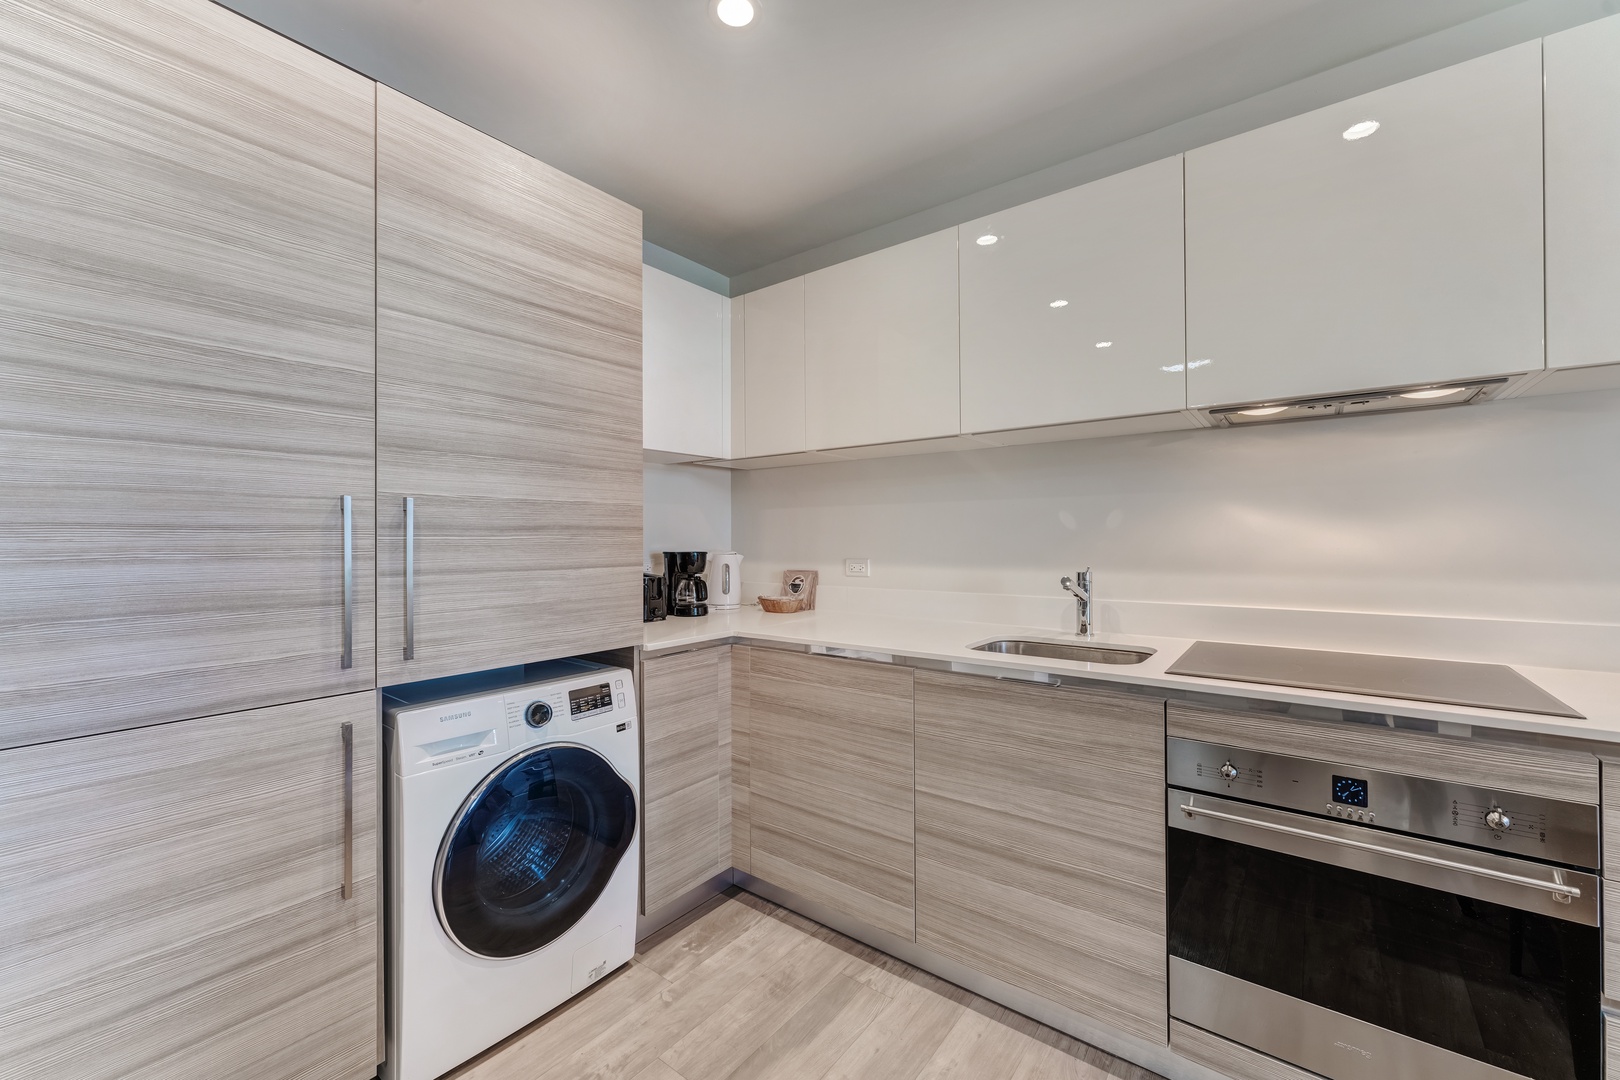 A private washer is available for your stay, tucked away in the kitchen